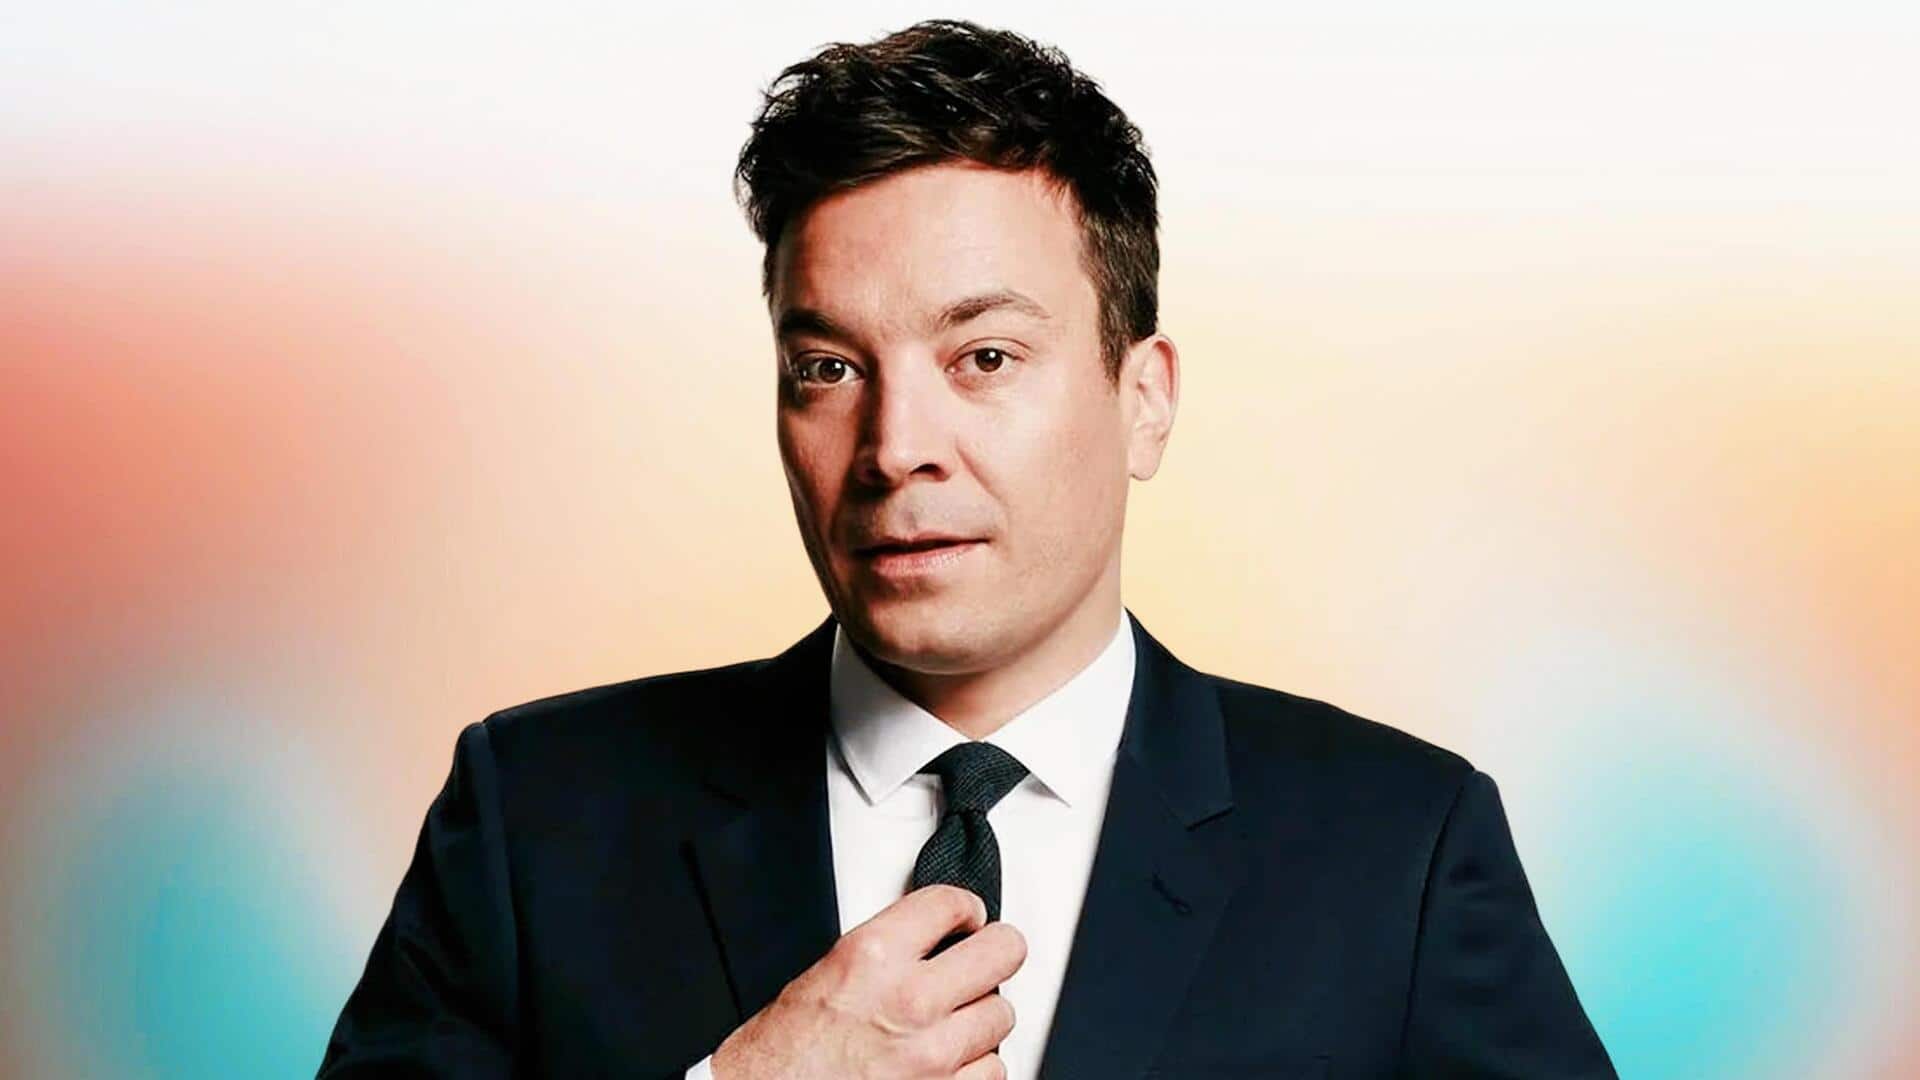 Allegations to apology: All about Jimmy Fallon's 'Tonight Show' controversy